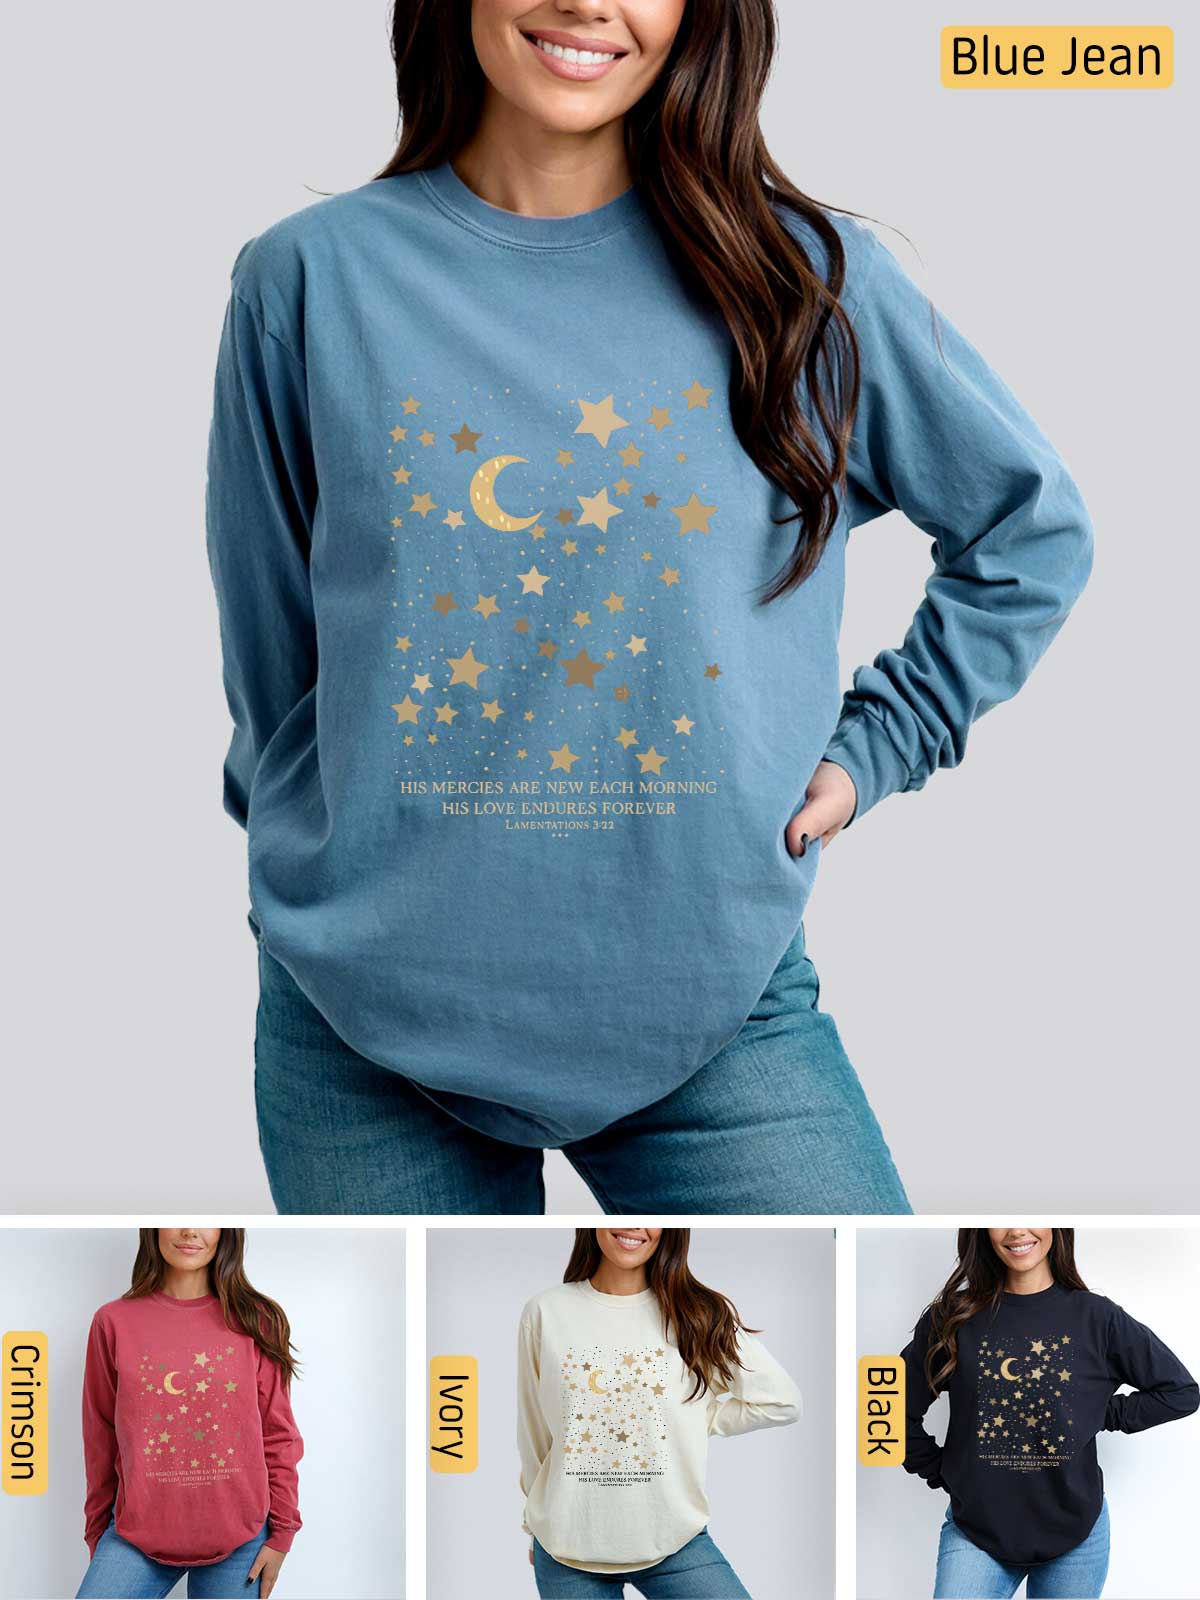 a woman wearing a blue sweater with stars and moon on it